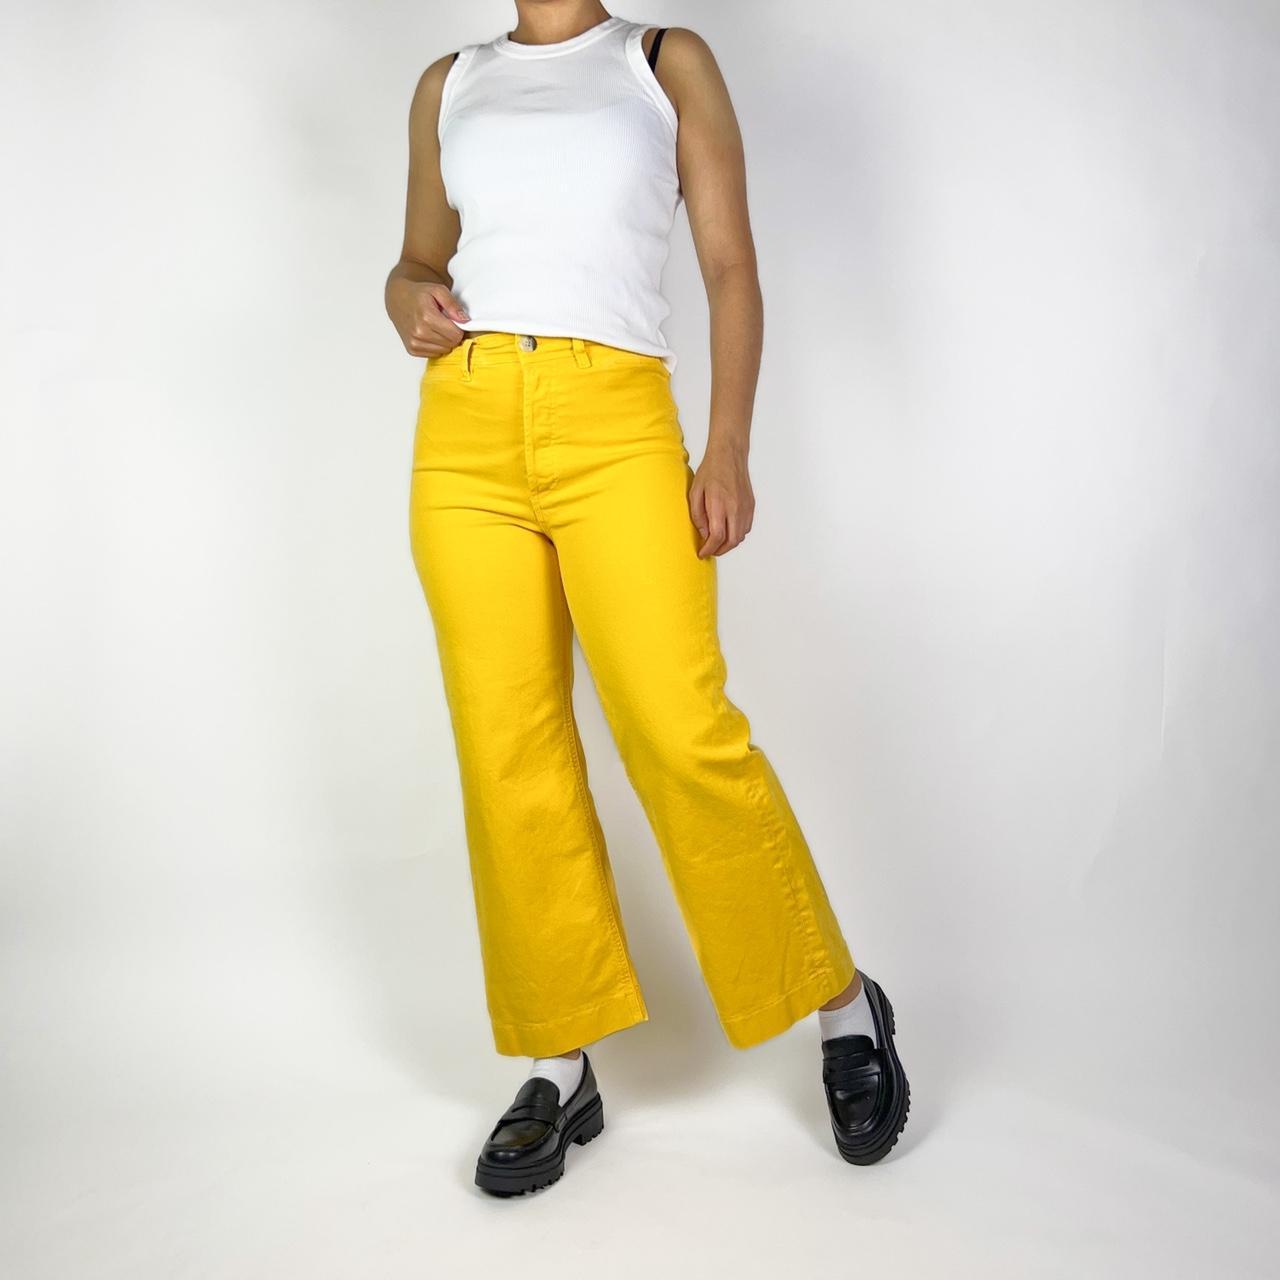 MiH Women's Yellow Jeans